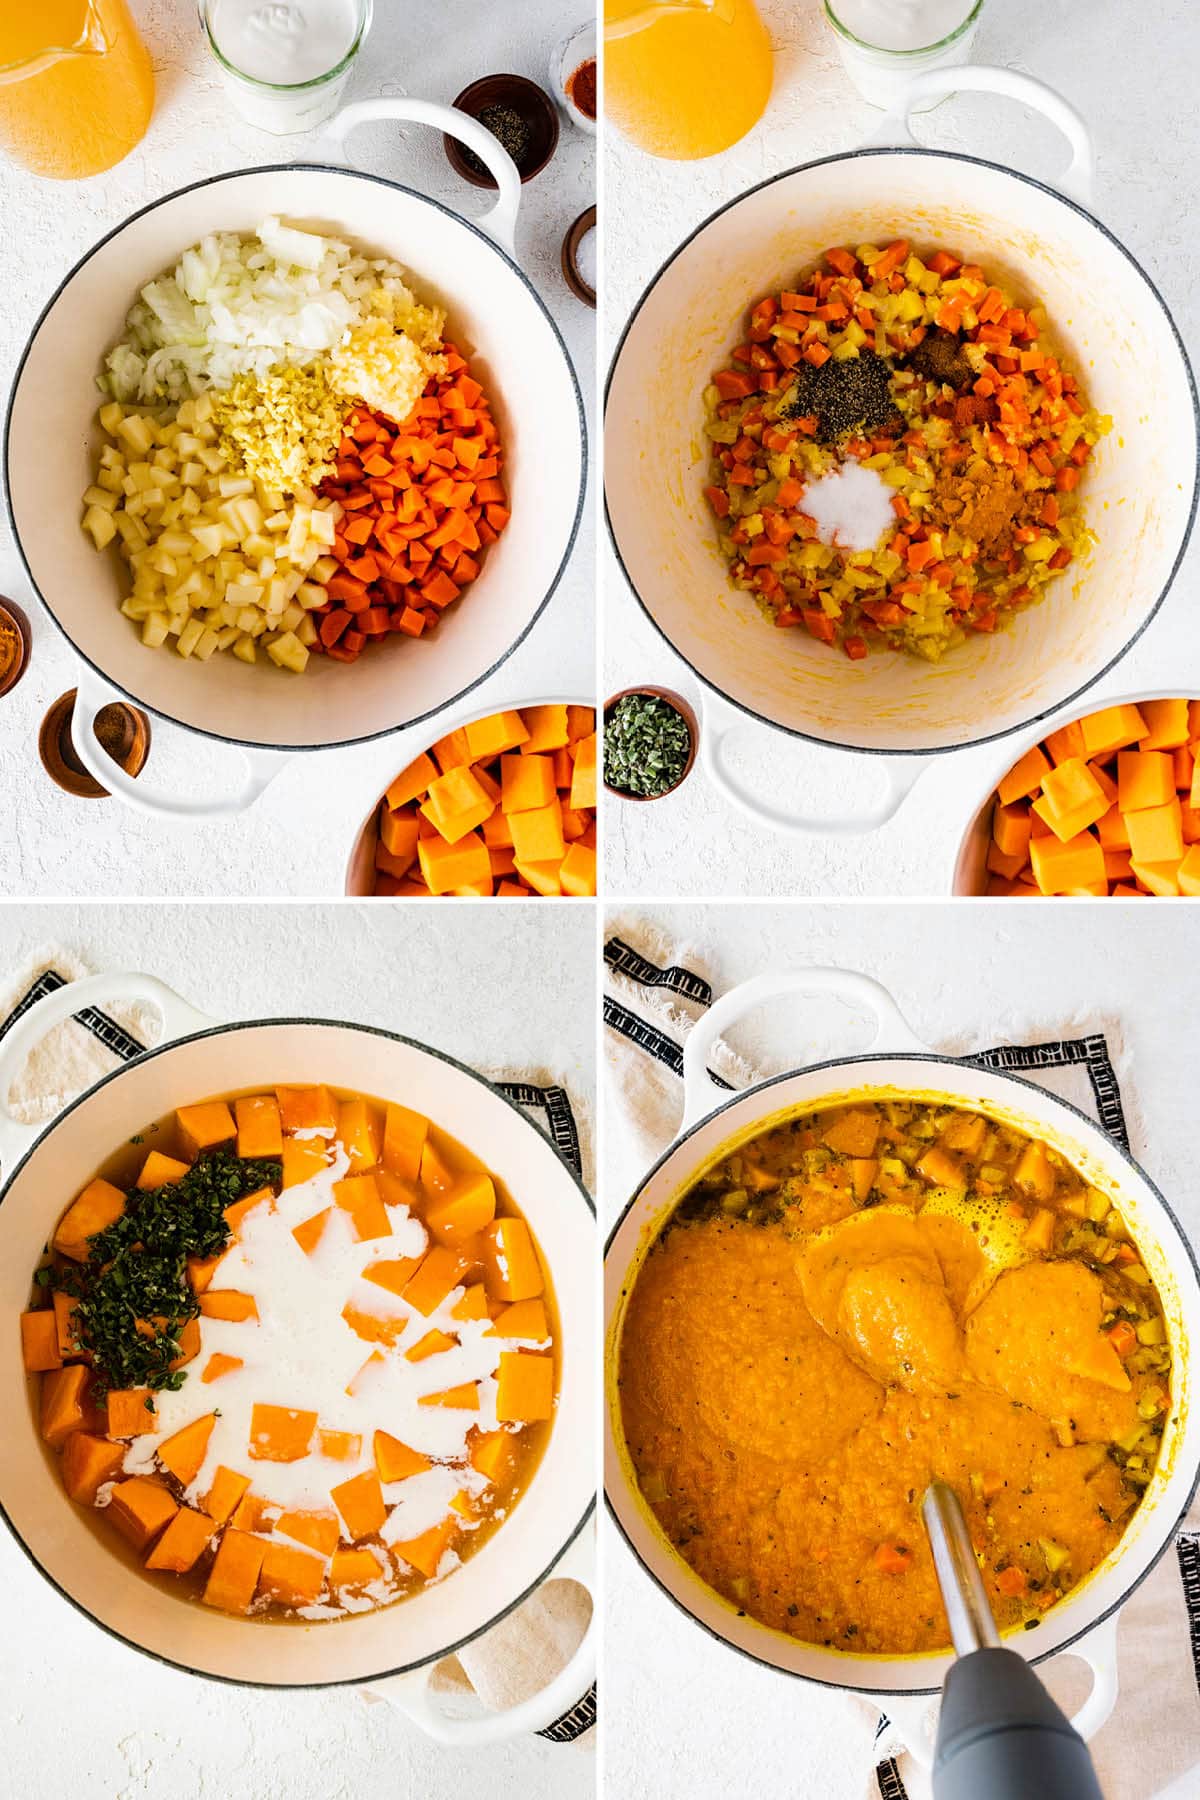 Collage of four photos showing the steps to make Butternut Squash Soup: sauteing veggies with spices, adding broth and coconut milk and then blending smooth.